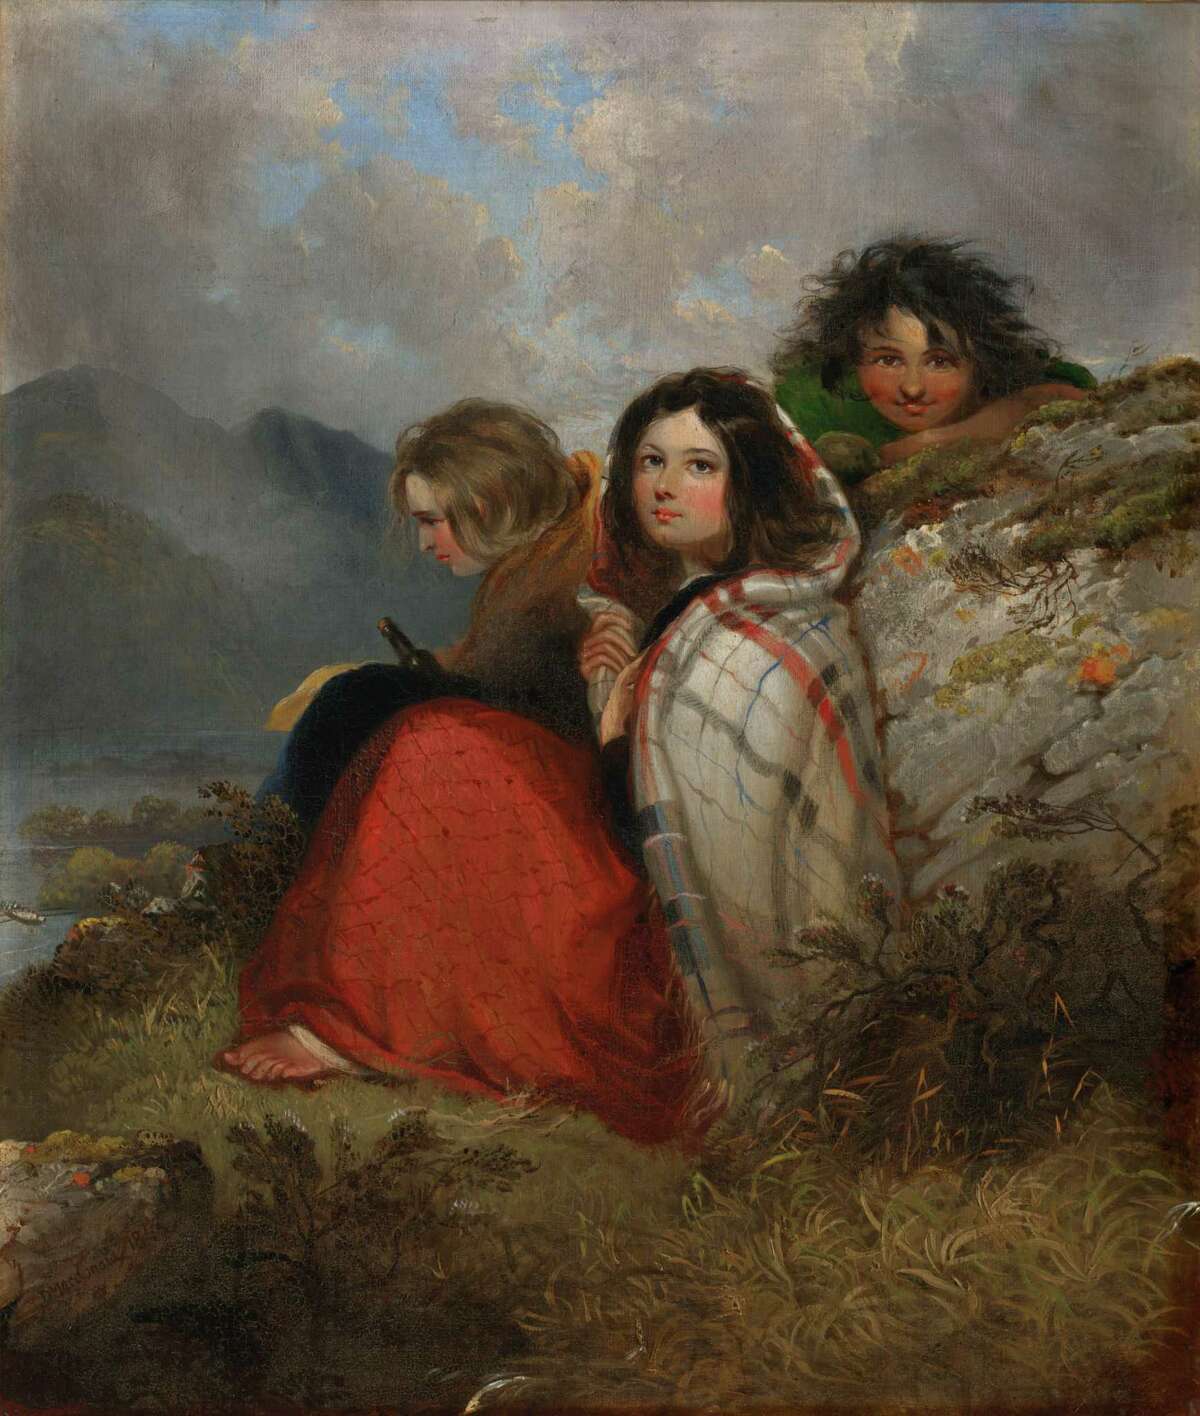 “Irish Peasant Children,” an oil on canvas, was completed at the height of the Irish famine in 1847, representing the three faces of Ireland: :the beautiful, the mischievous and the dangerous.” The painting had been a major work featured at Ireland’s Great Hunger Museum at Quinnipiac University.